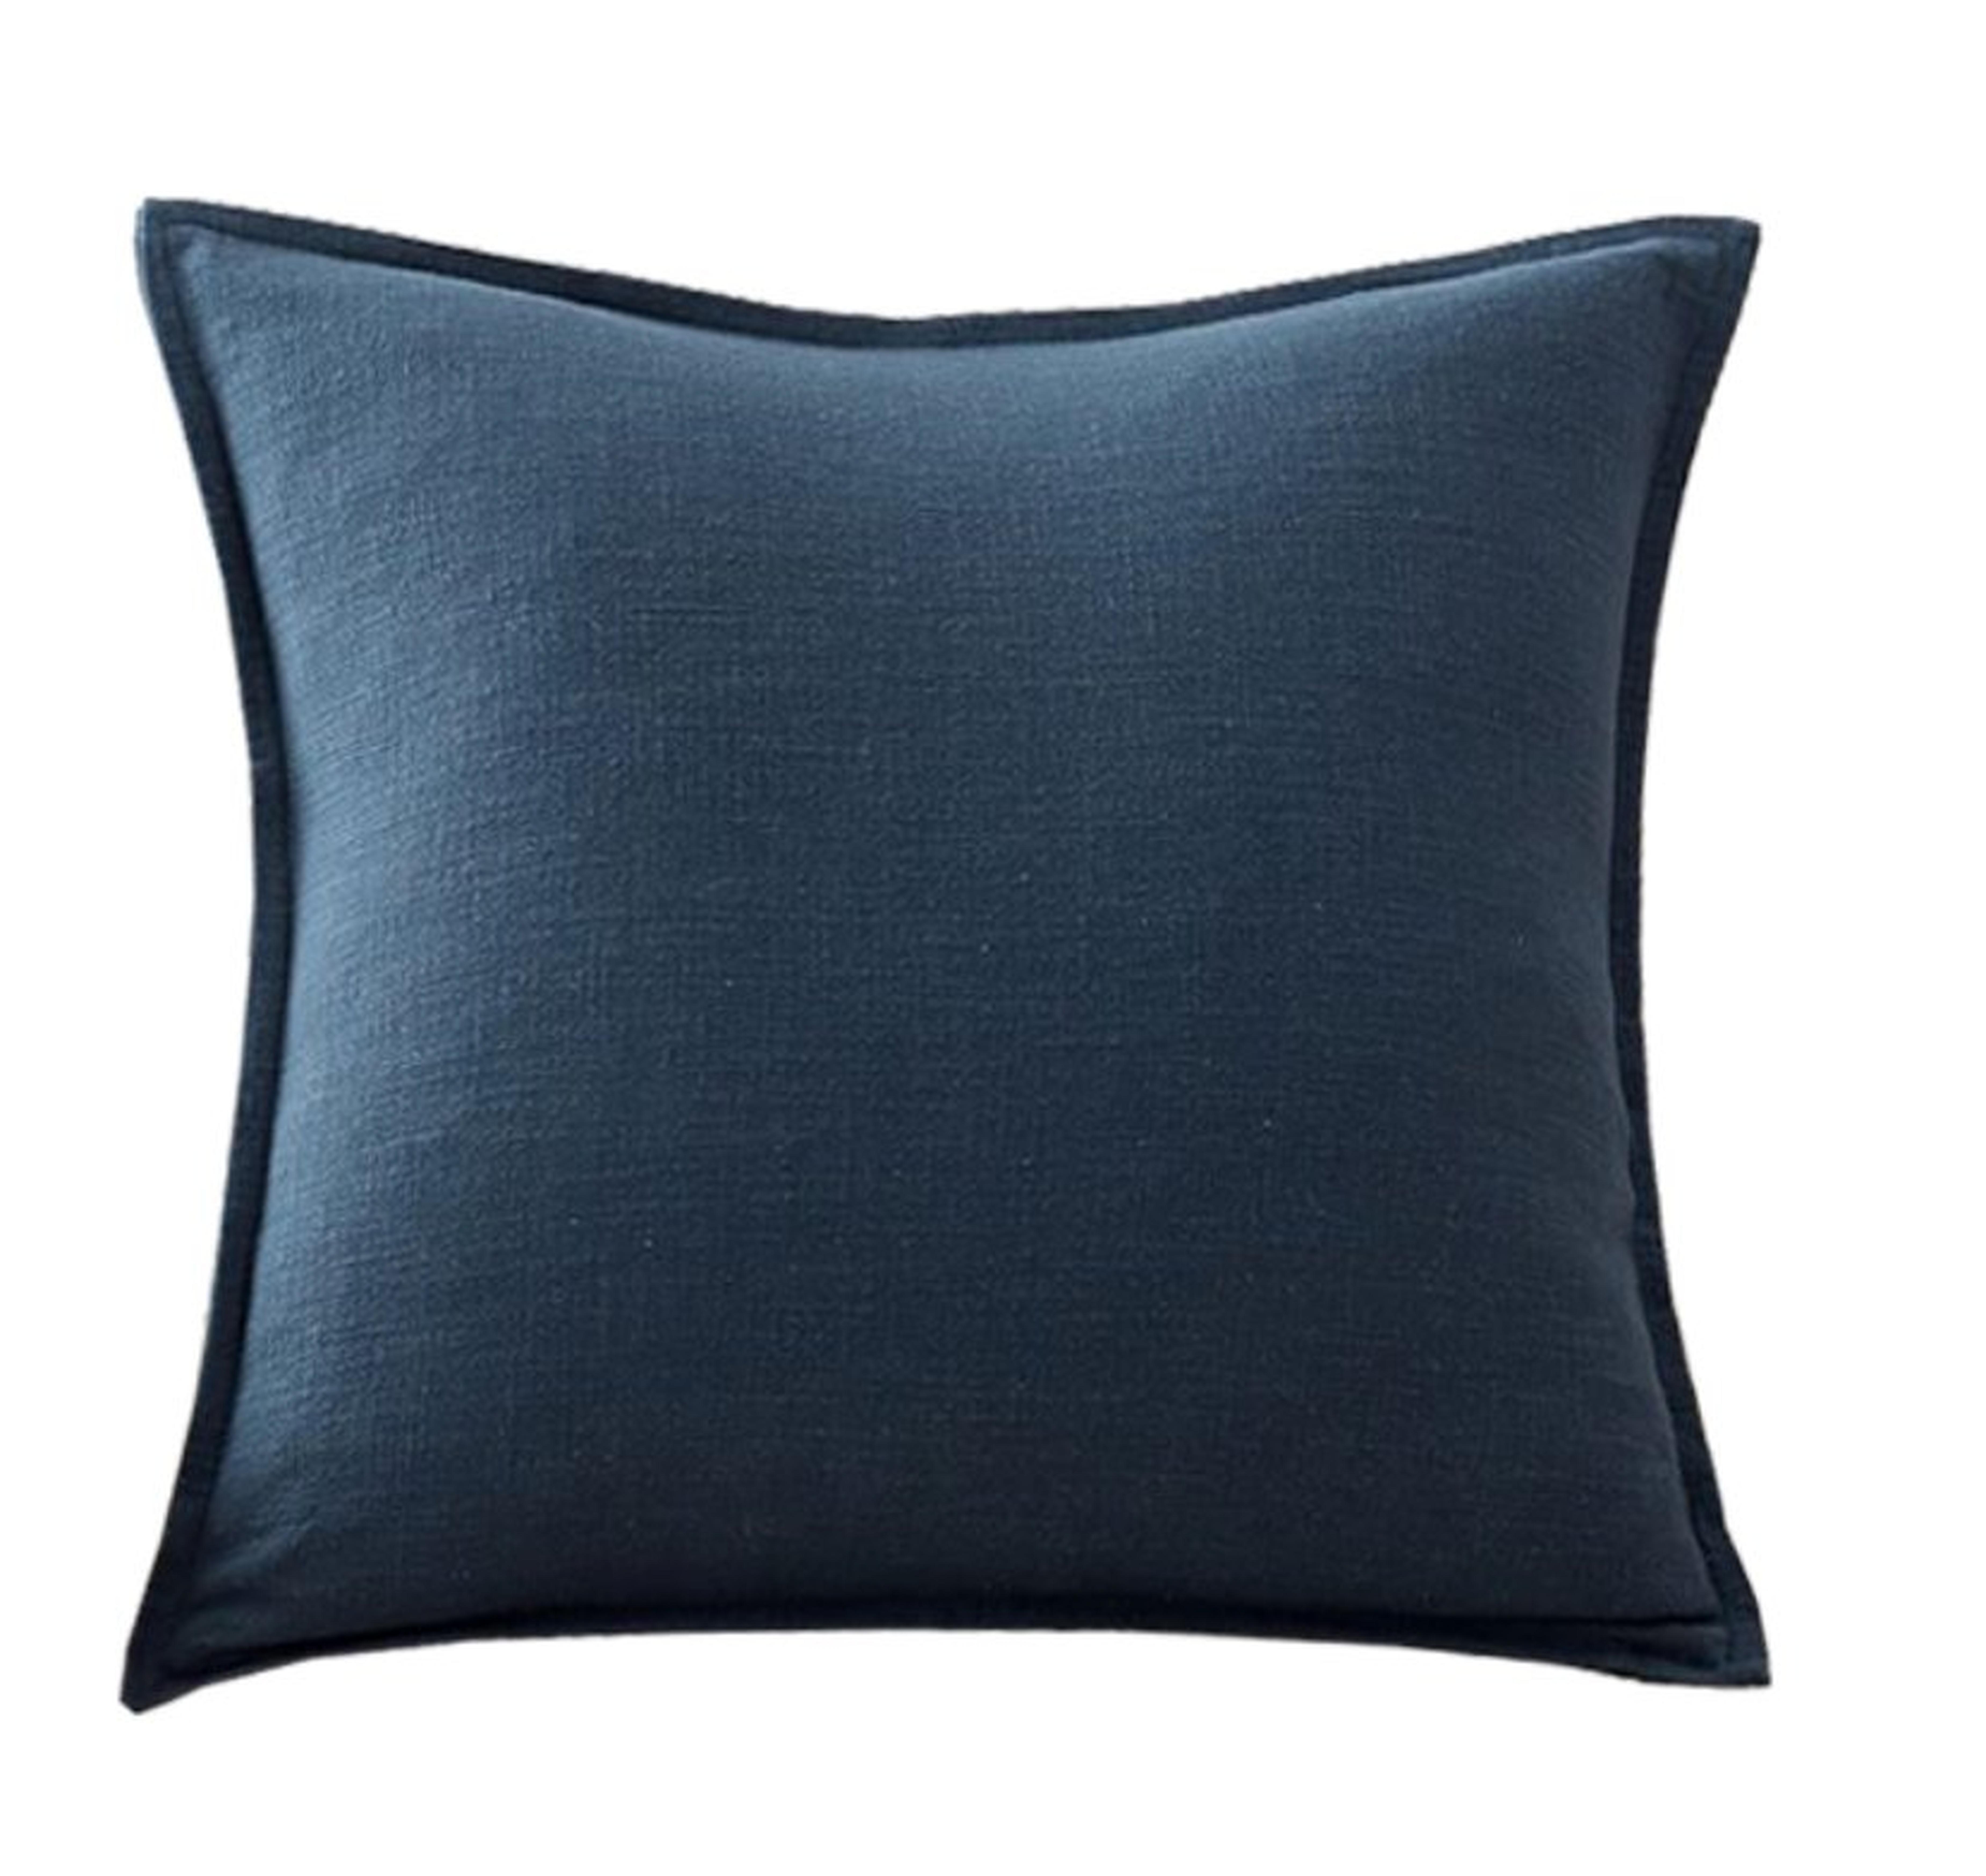 Organic Cotton Casual Reversible Pillow Cover, 20 x 20", Navy - Pottery Barn